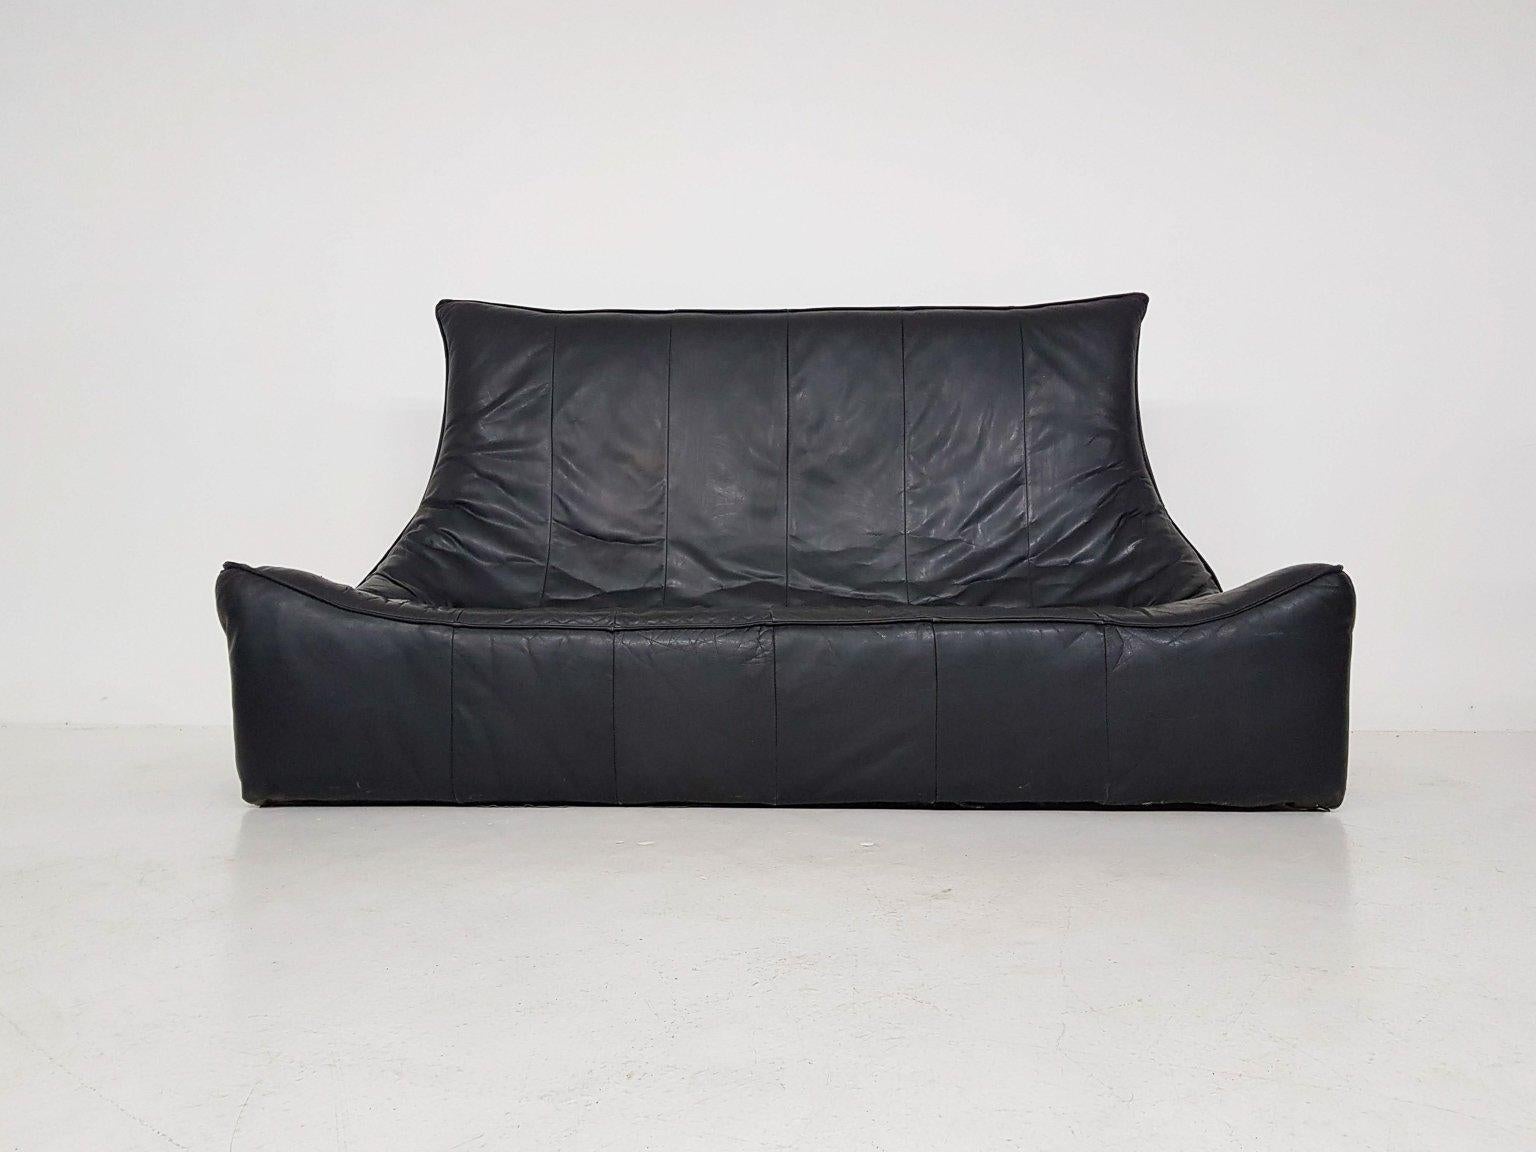 Black leather 3 seater sofa by Dutch designer Gerard van den Berg for Montis, the Netherlands 1970s.

This is one of the most iconic sofas of the Dutch late mid-century. Gerard van den Berg designed his 